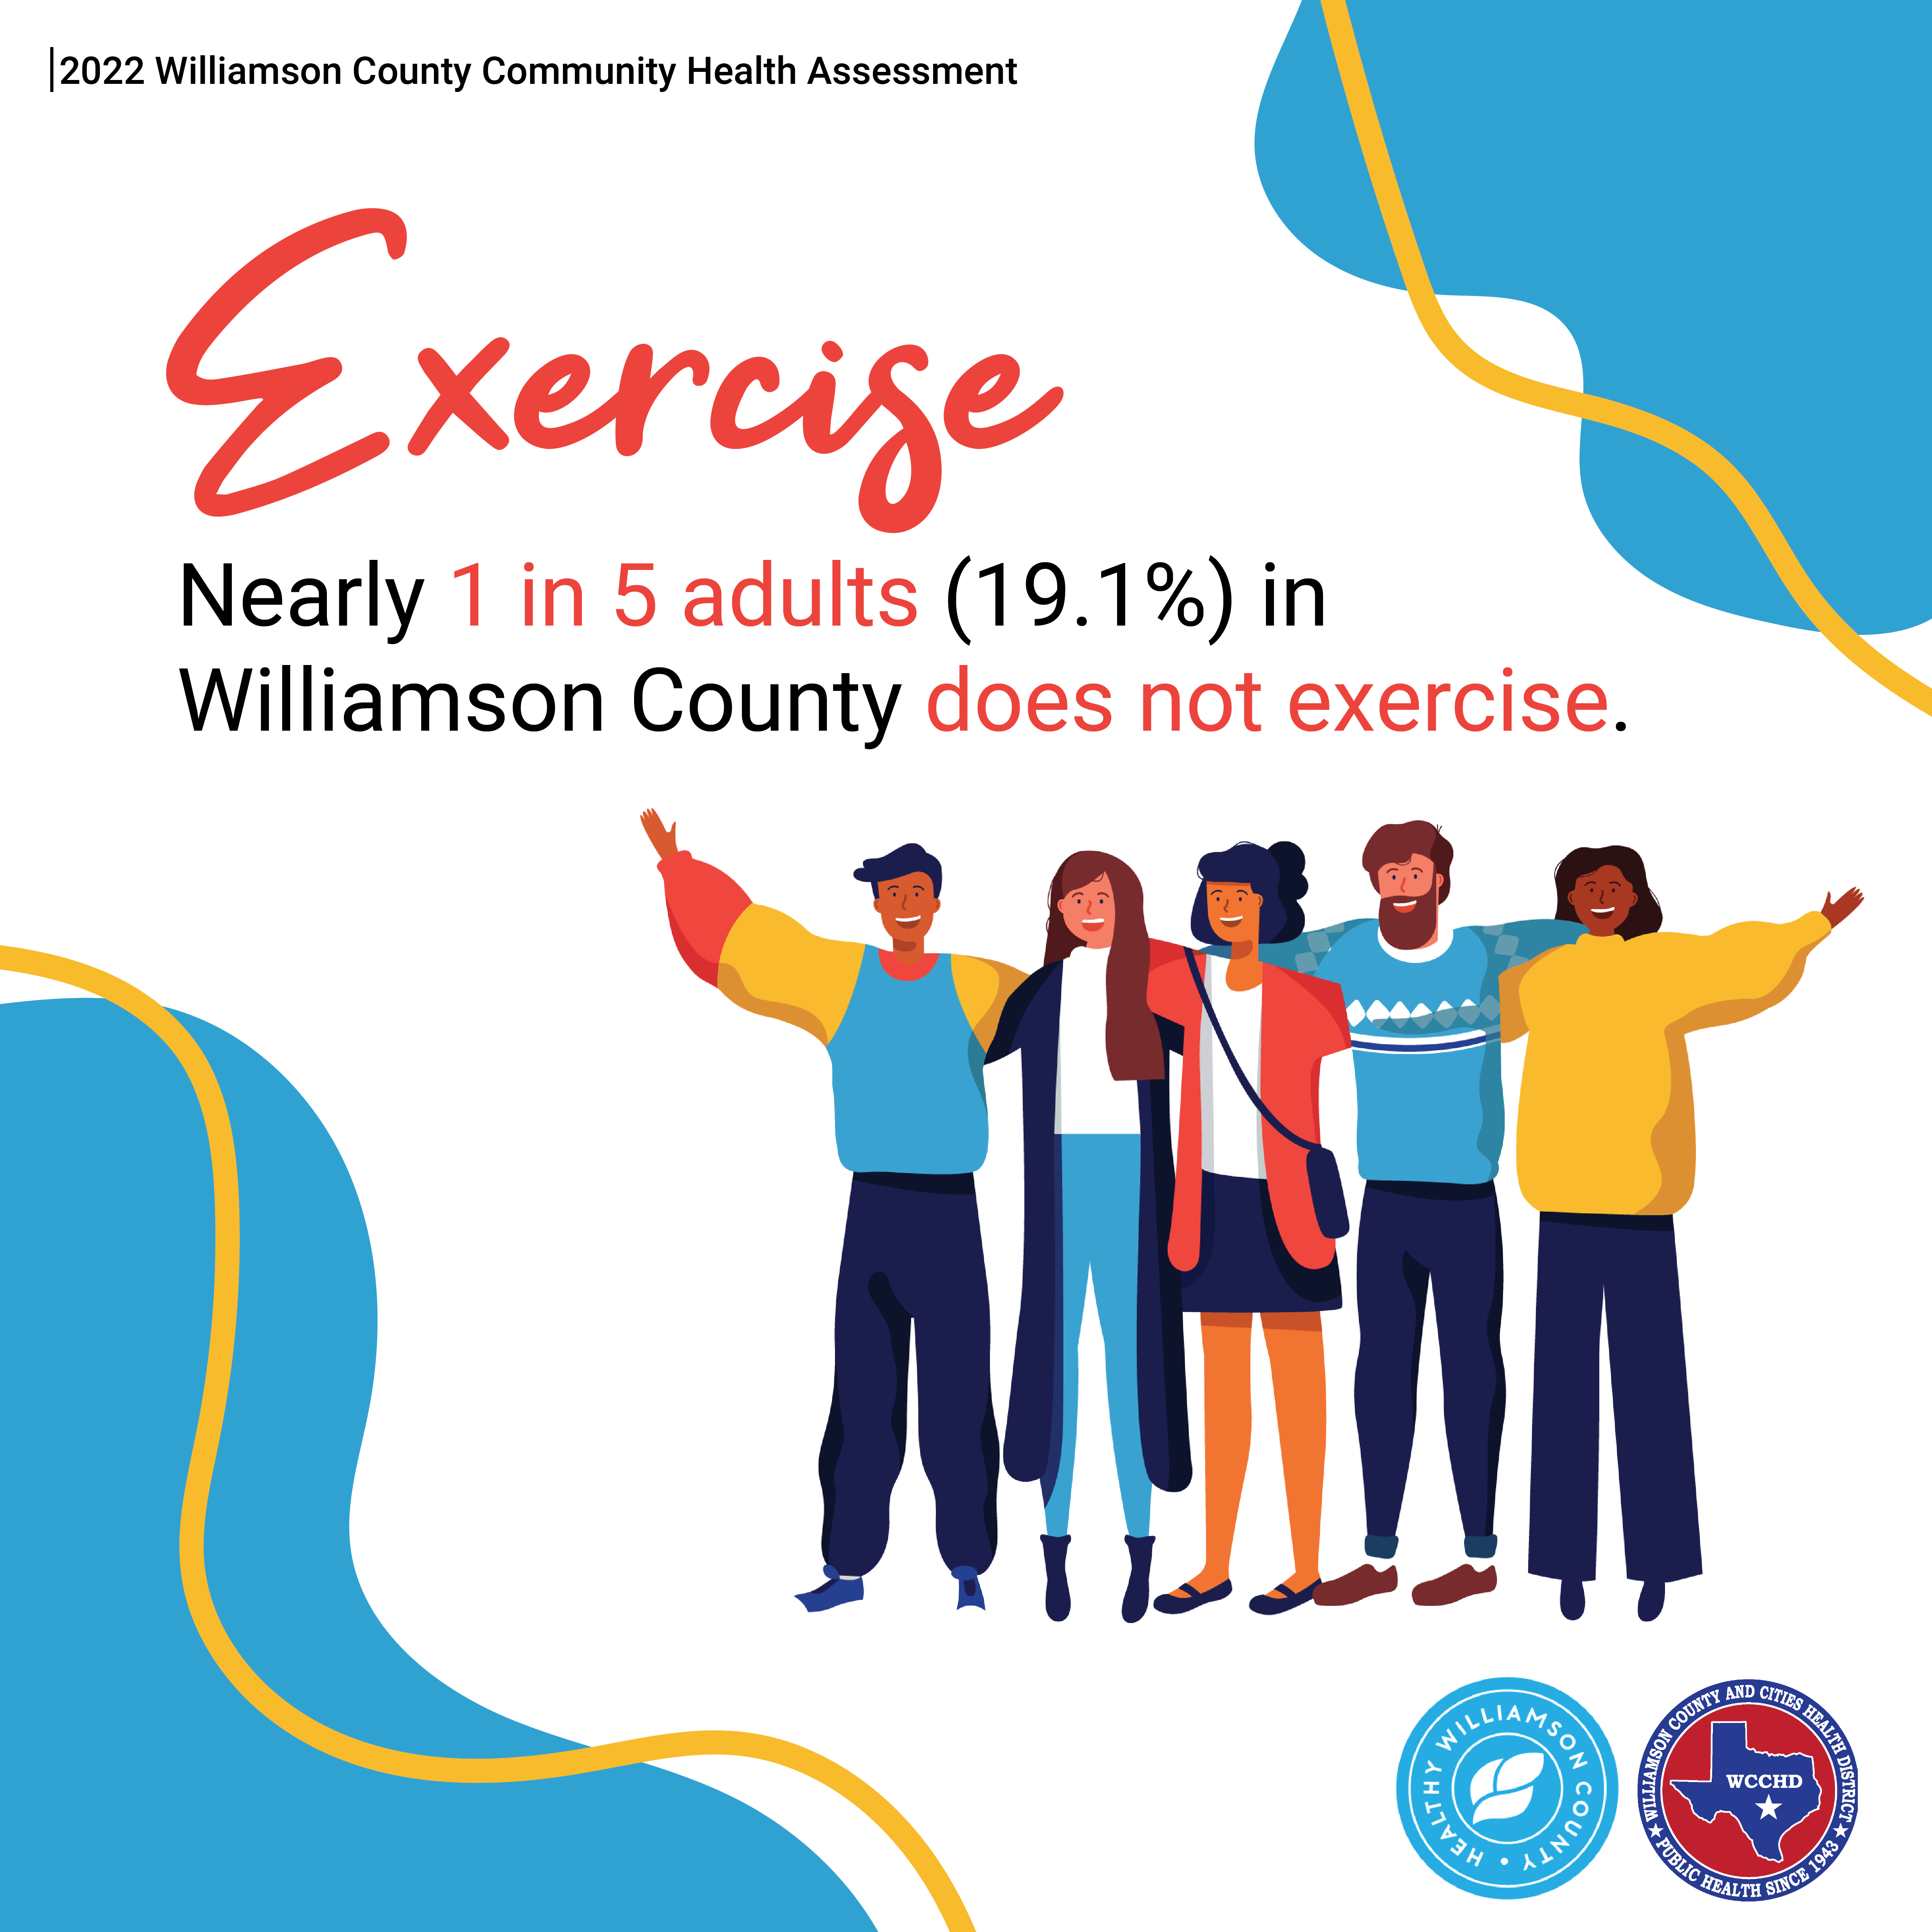 2022 Williamson County Community Health Assessment. Exercise. Nearly 1 in 5 adults (19.1%) in Williamson County does not exercise. Below, five illustrated people with their arms on each other's shoulders, smiling. Blobs and squiggly lines in bottom left and top right corners. Logos of Healthy Williamson County and Williamson County and Cities Health District.